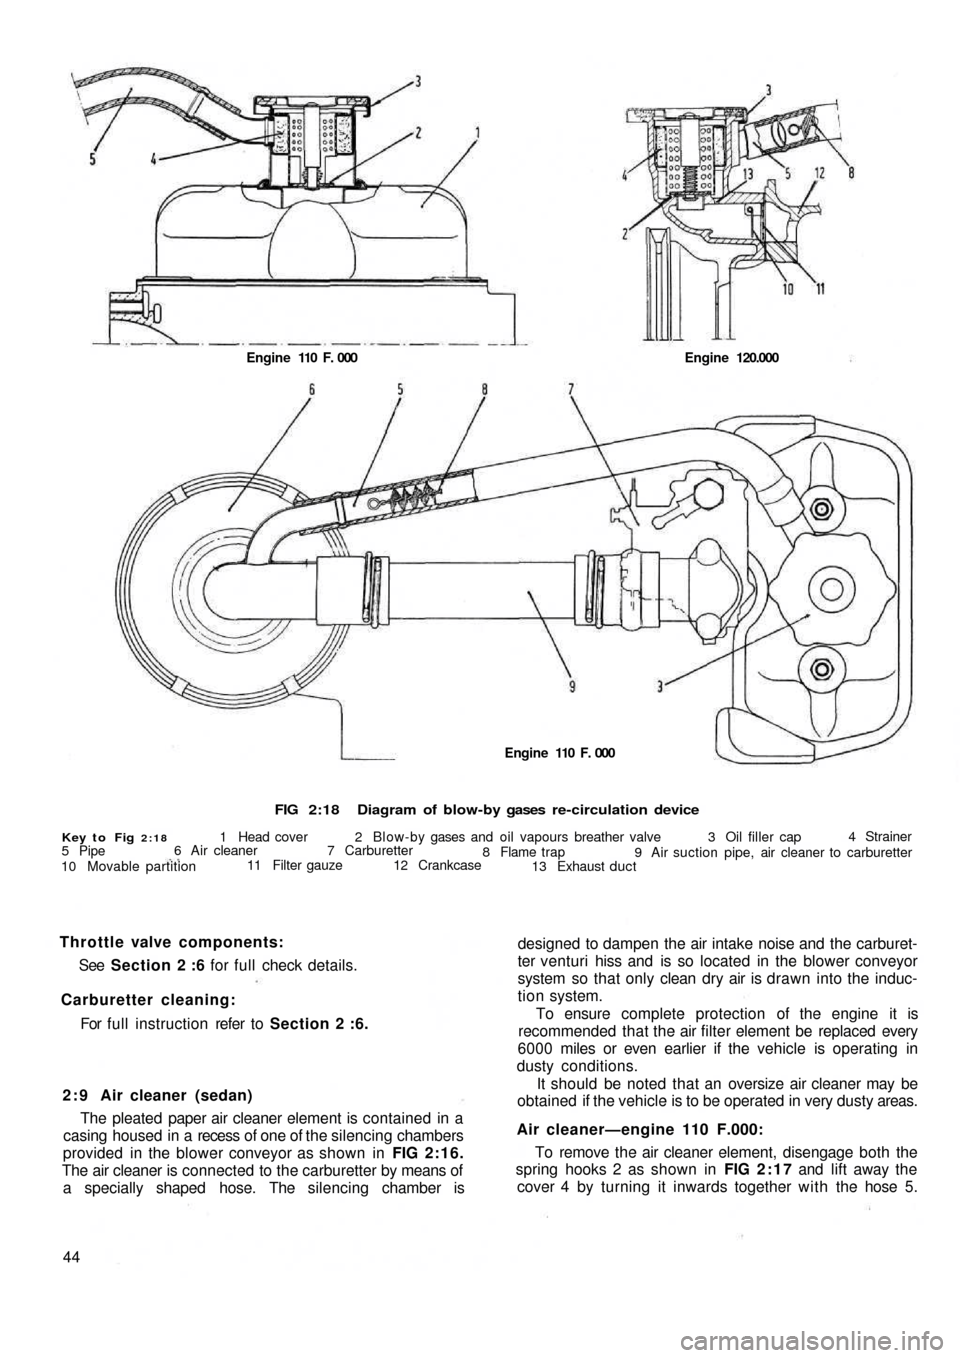 FIAT 500 1957 1.G Owners Manual FIG 2:18Diagram of blow-by gases  re-circulation device
Key to Fig 2:181 Head cover 2 Blow-by gases and  oil vapours breather valve 3 Oil filler cap4 Strainer
9 Air suction pipe, air cleaner to carbur